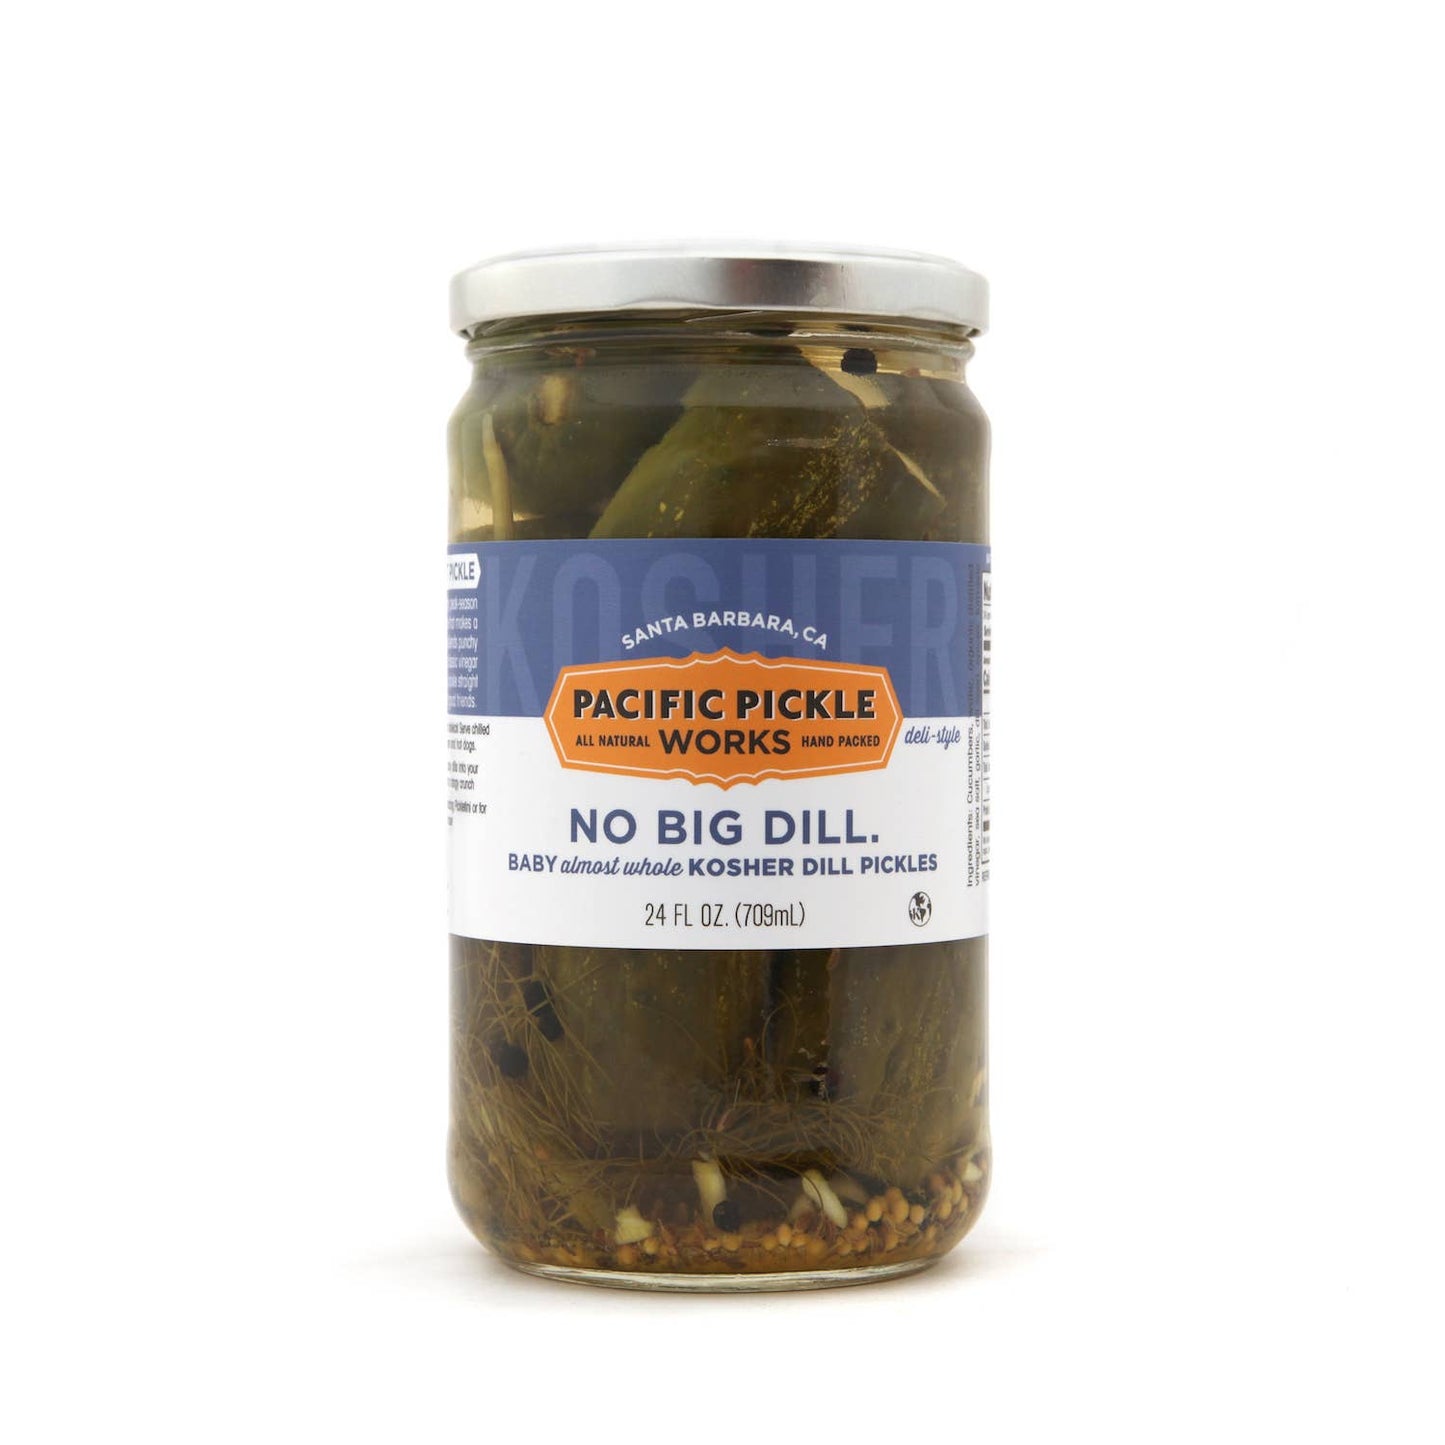 Pacific Pickle Works - No Big Dill. Kosher Baby Dill Pickles